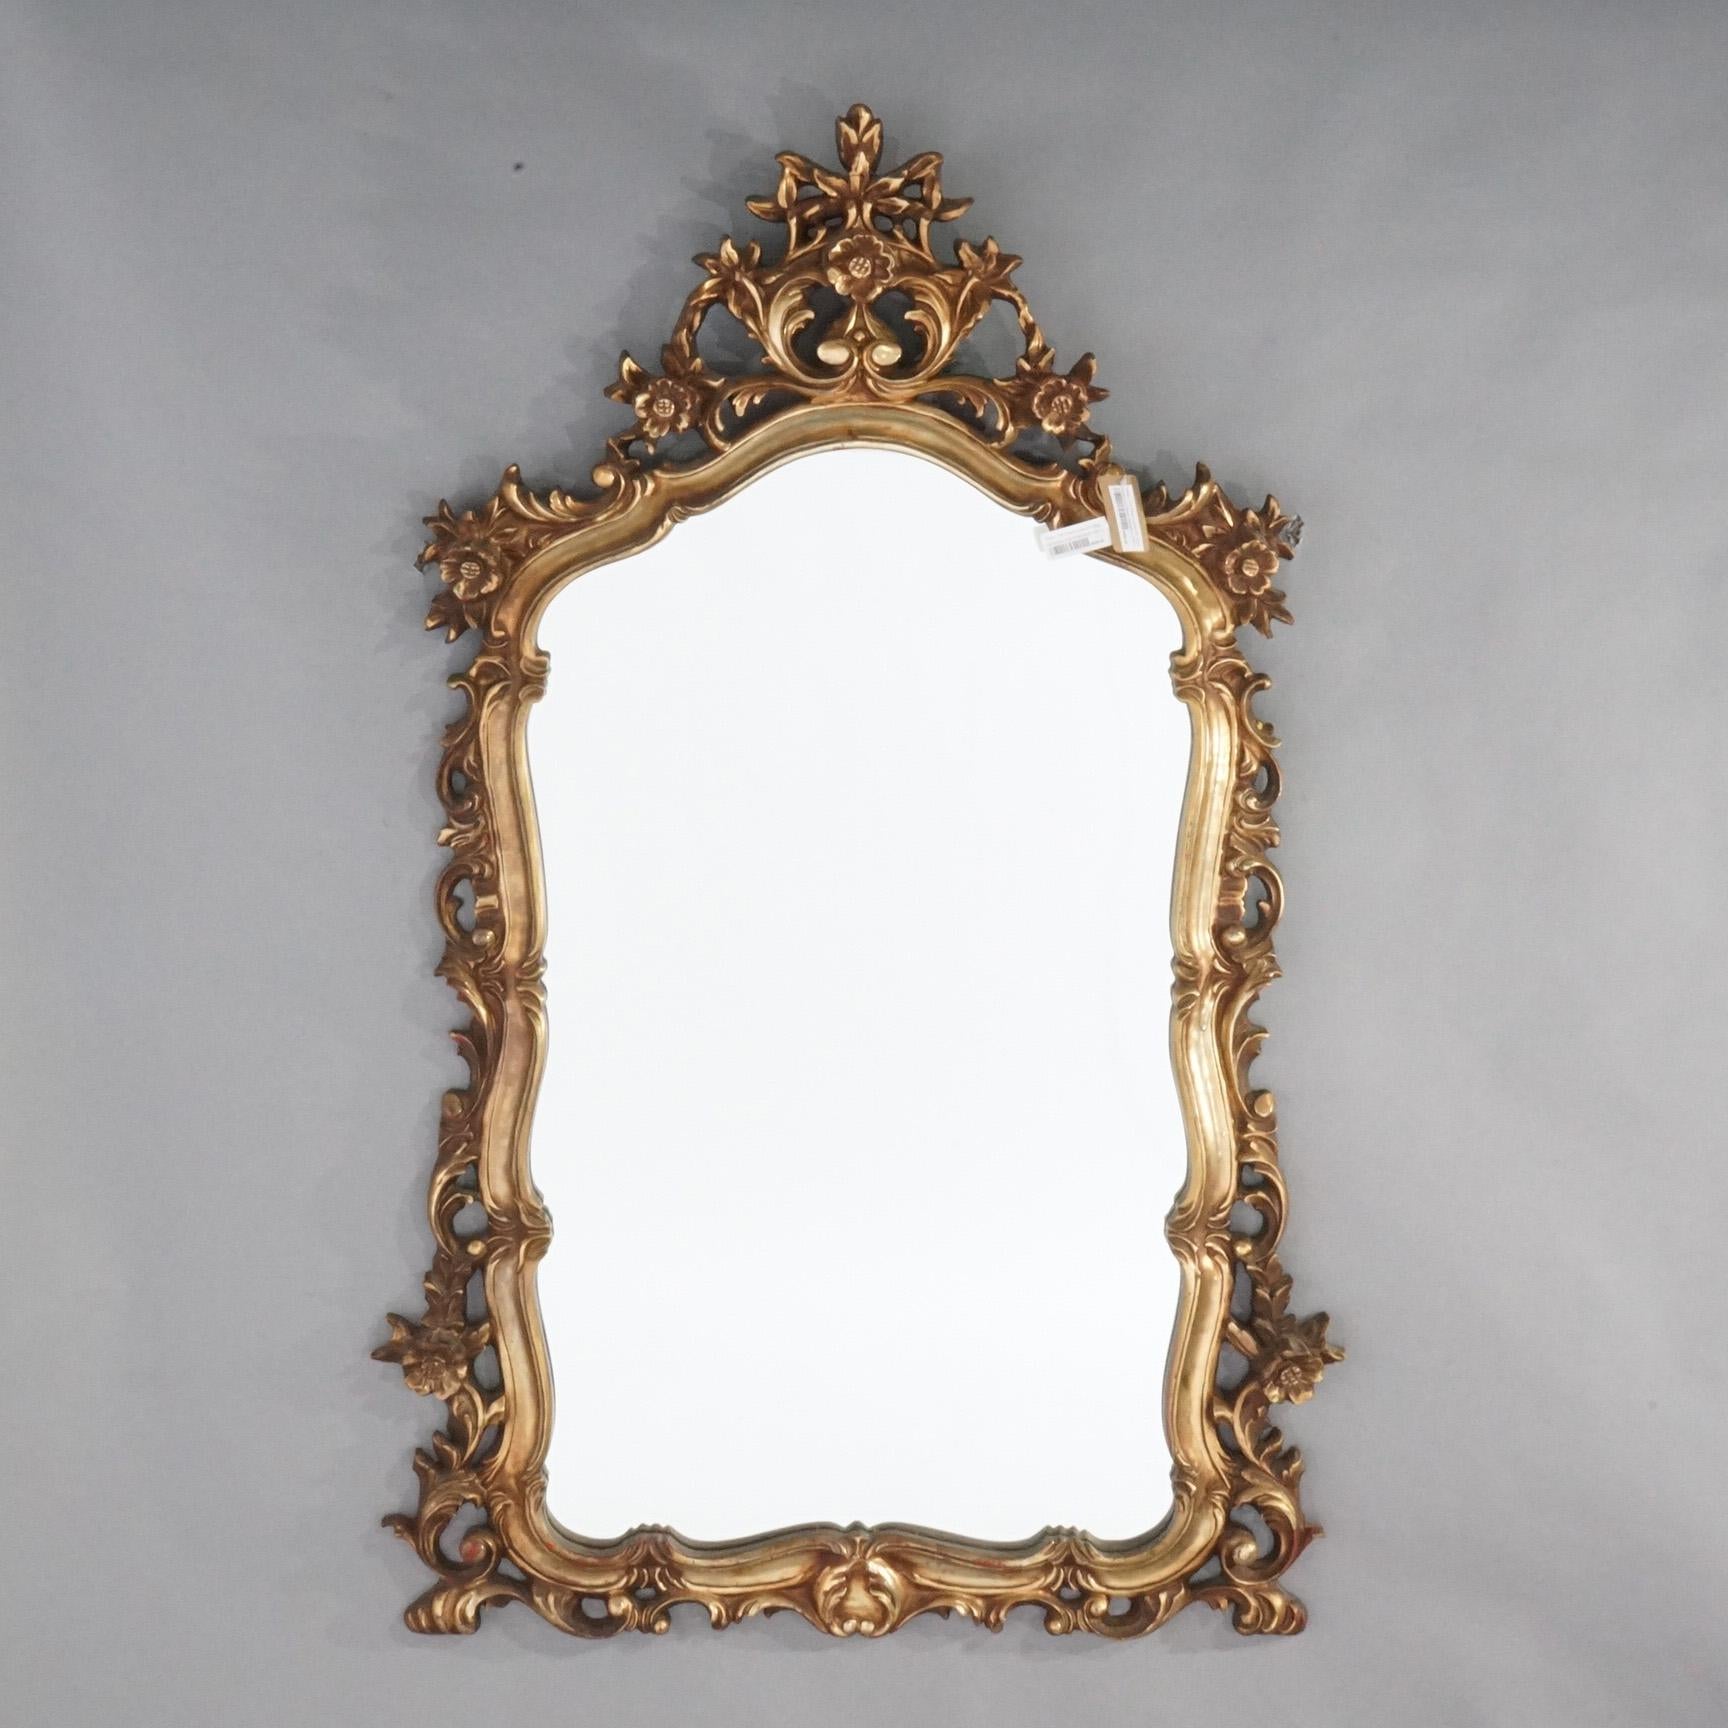 A large French Louis XIV style wall mirror offers gilt syroco construction with elaborate foliate frame, 20th century

Measures- 56.5''H x 35.75''W x 2.25''D.